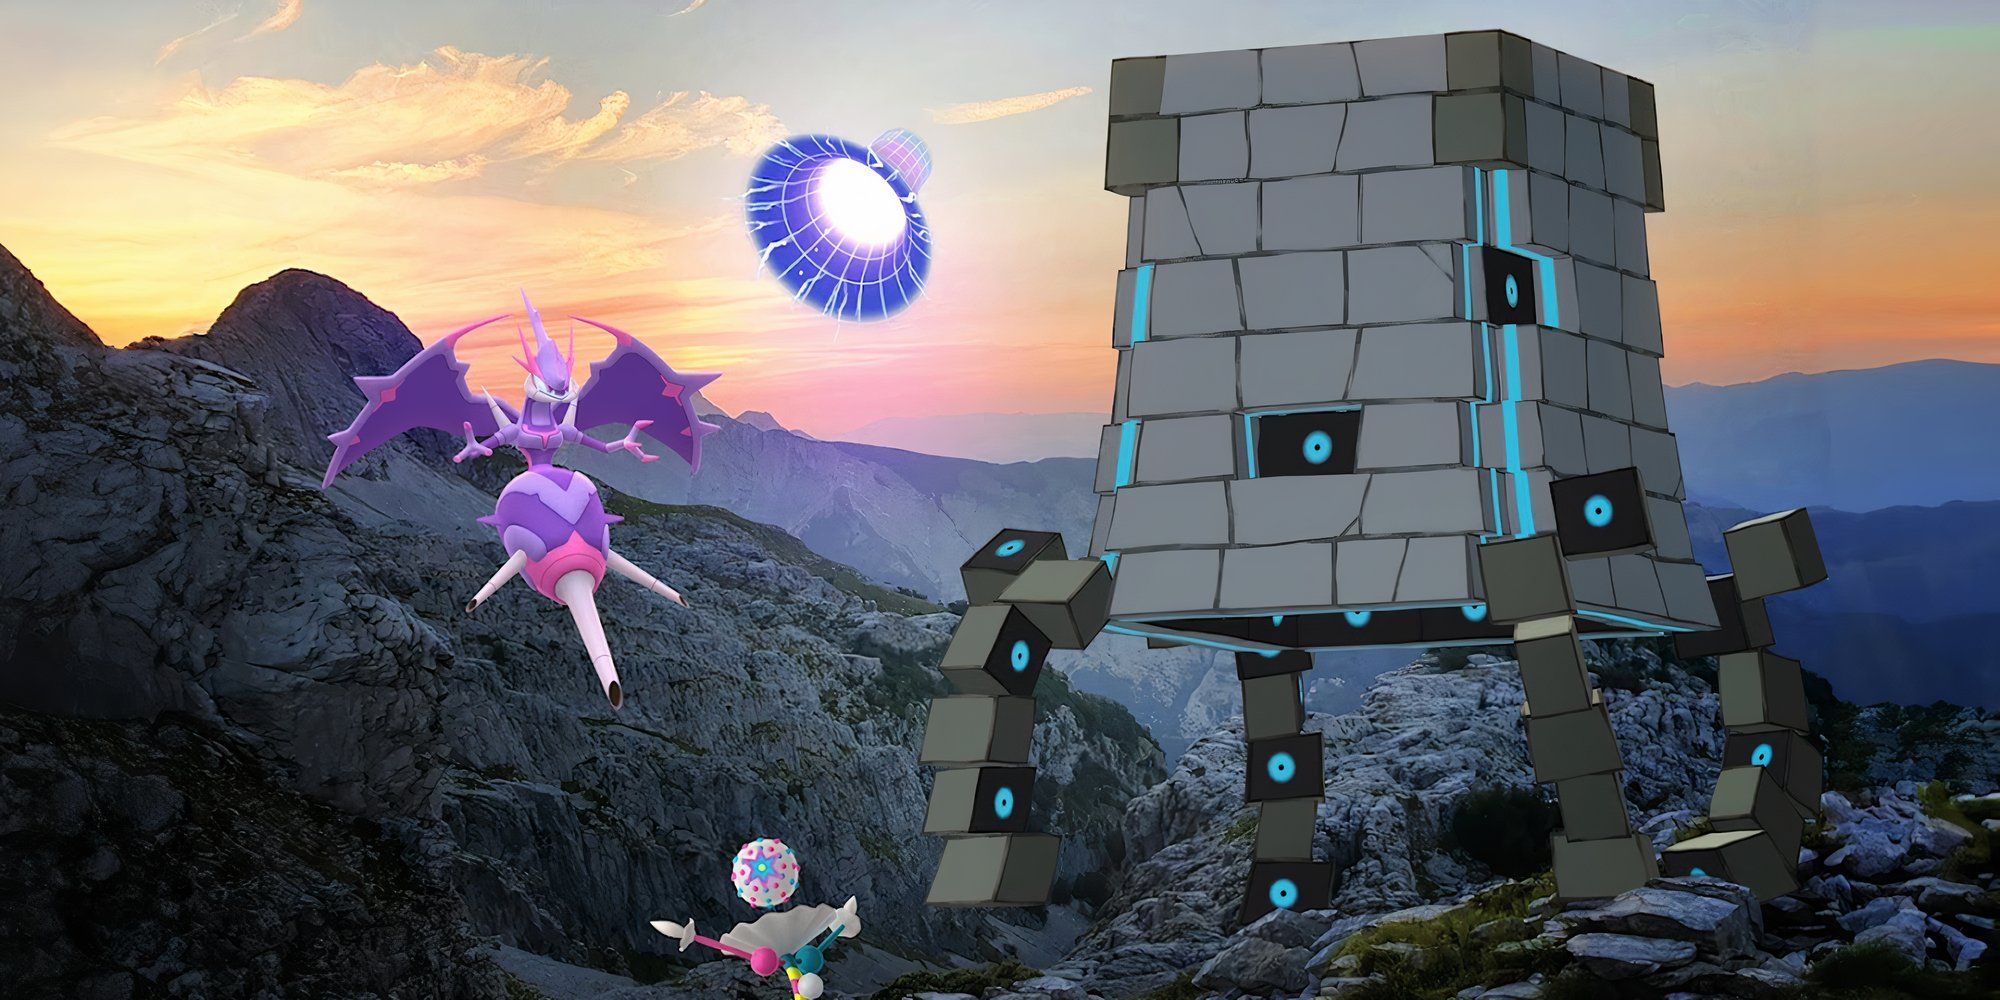 Image of Naganadel, Blacephalon, and Stakataka from Pokemon, all on a rocky cliffside